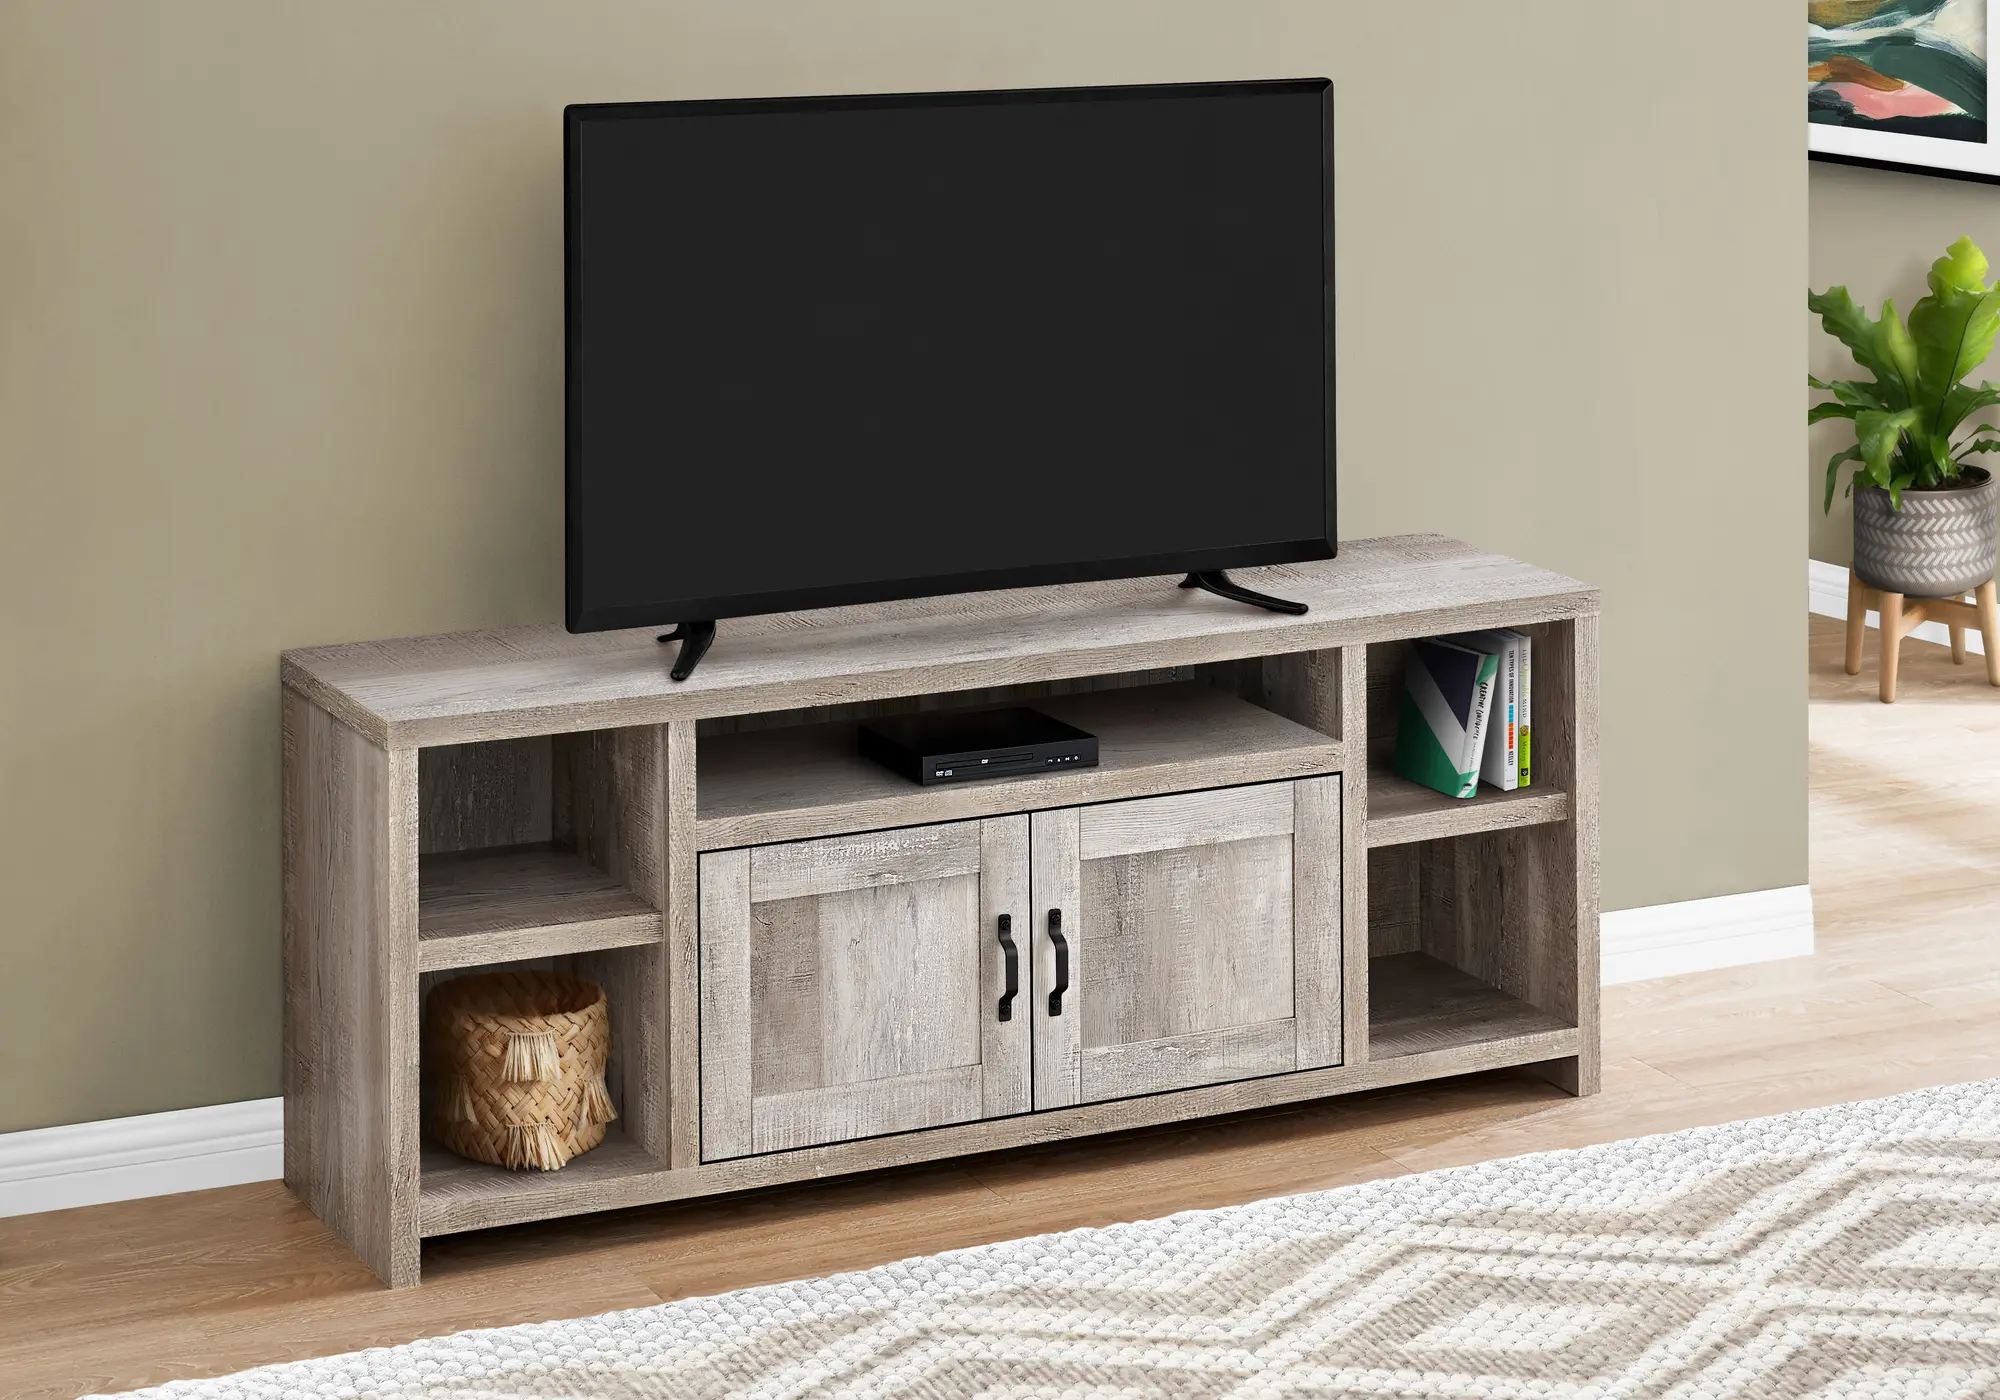 Photos - Mount/Stand Monarch Specialties Farmhouse 60 Inch Taupe Reclaimed Wood TV Stand I 2742 